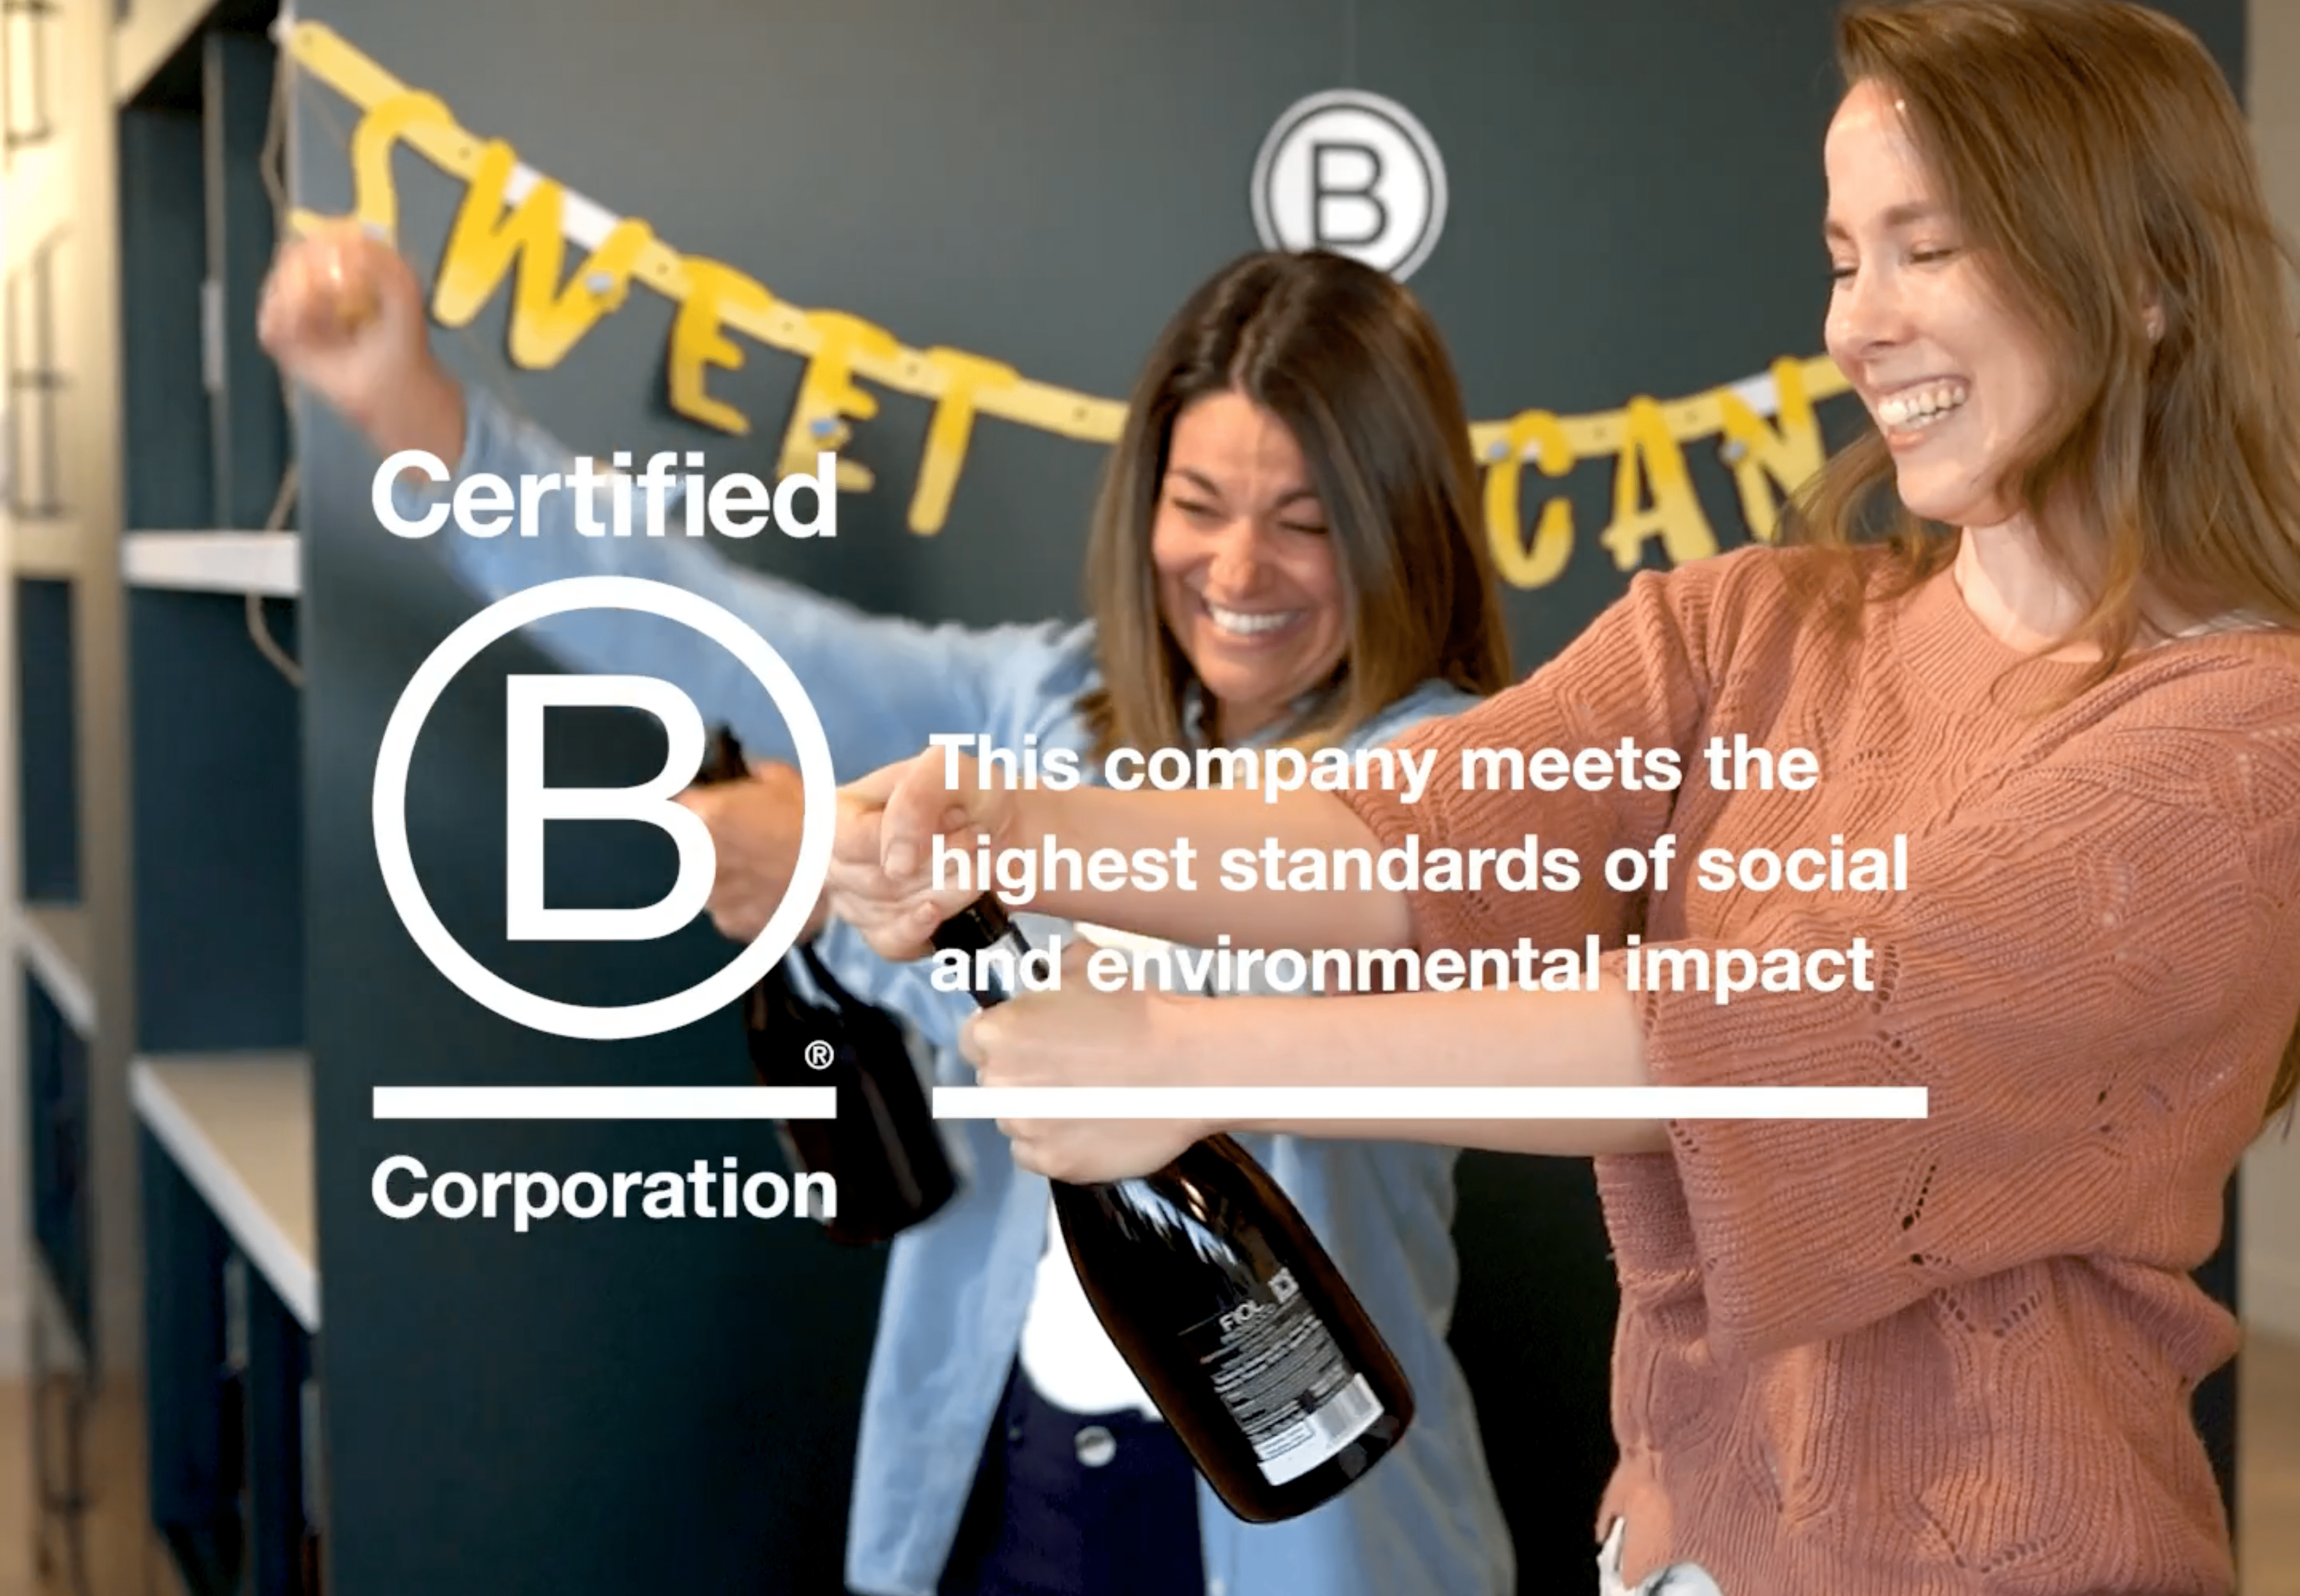 Earth Rated is officially a certified B Corp!